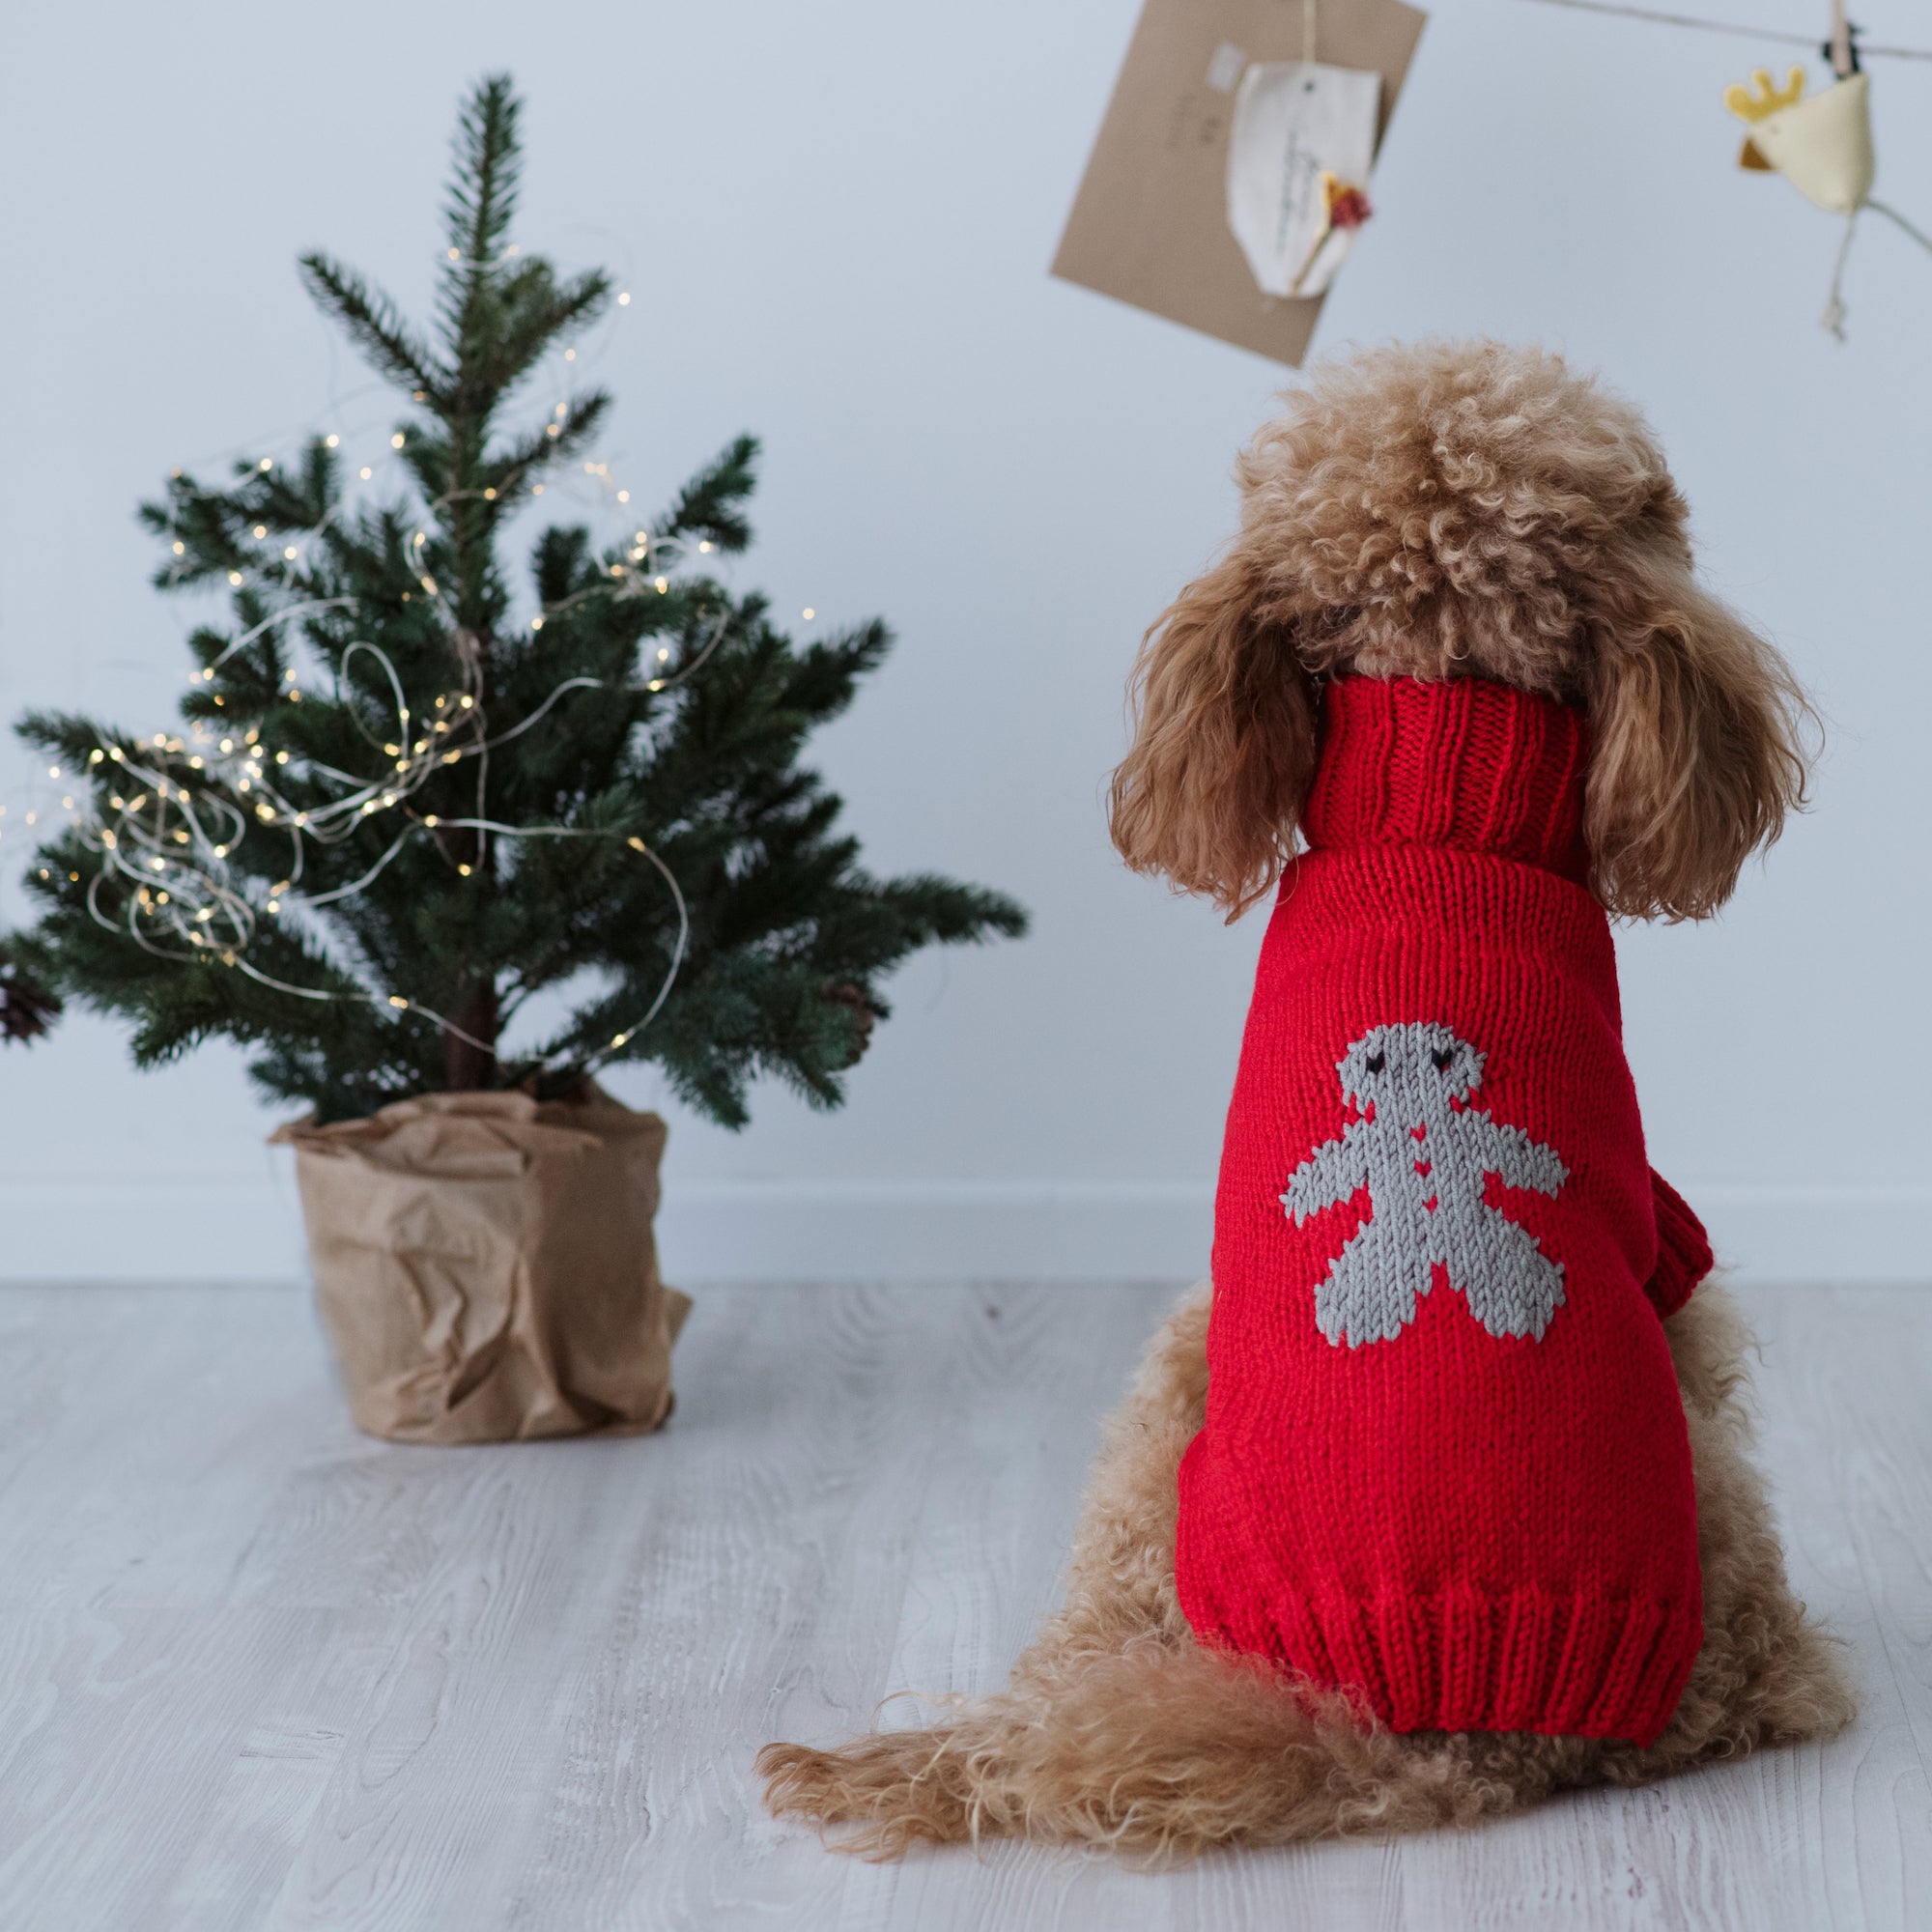 Mr. Ginger Bread | Christmas Sweater | Red